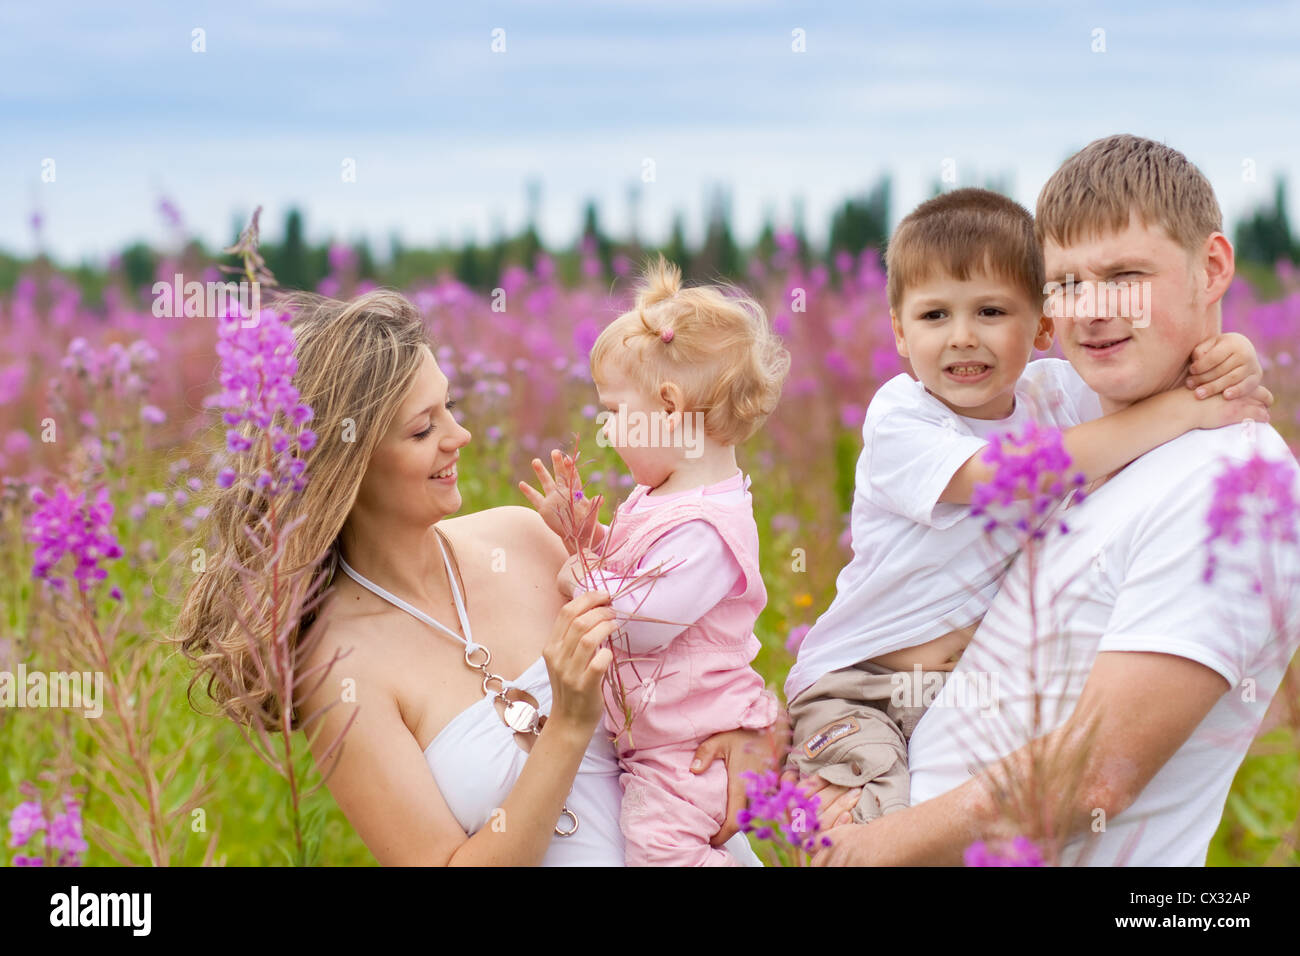 Happy Family together in meadow Banque D'Images